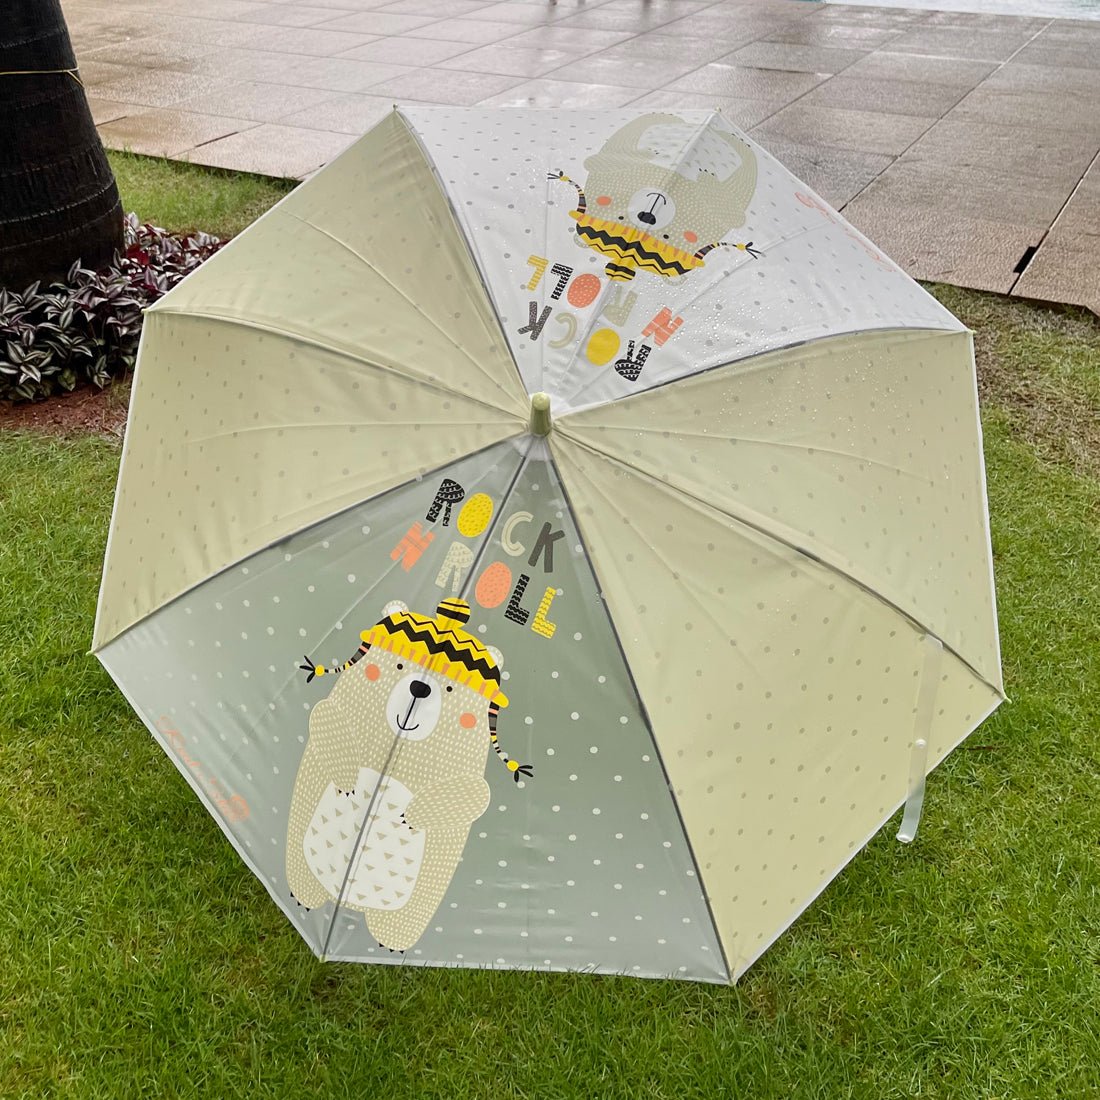 Olive Green, Translucent Rock and Roll Kelly Jo Teddy print with polka dots, Rain and All-season Umbrella for Kids & Adults - Little Surprise BoxOlive Green, Translucent Rock and Roll Kelly Jo Teddy print with polka dots, Rain and All-season Umbrella for Kids & Adults